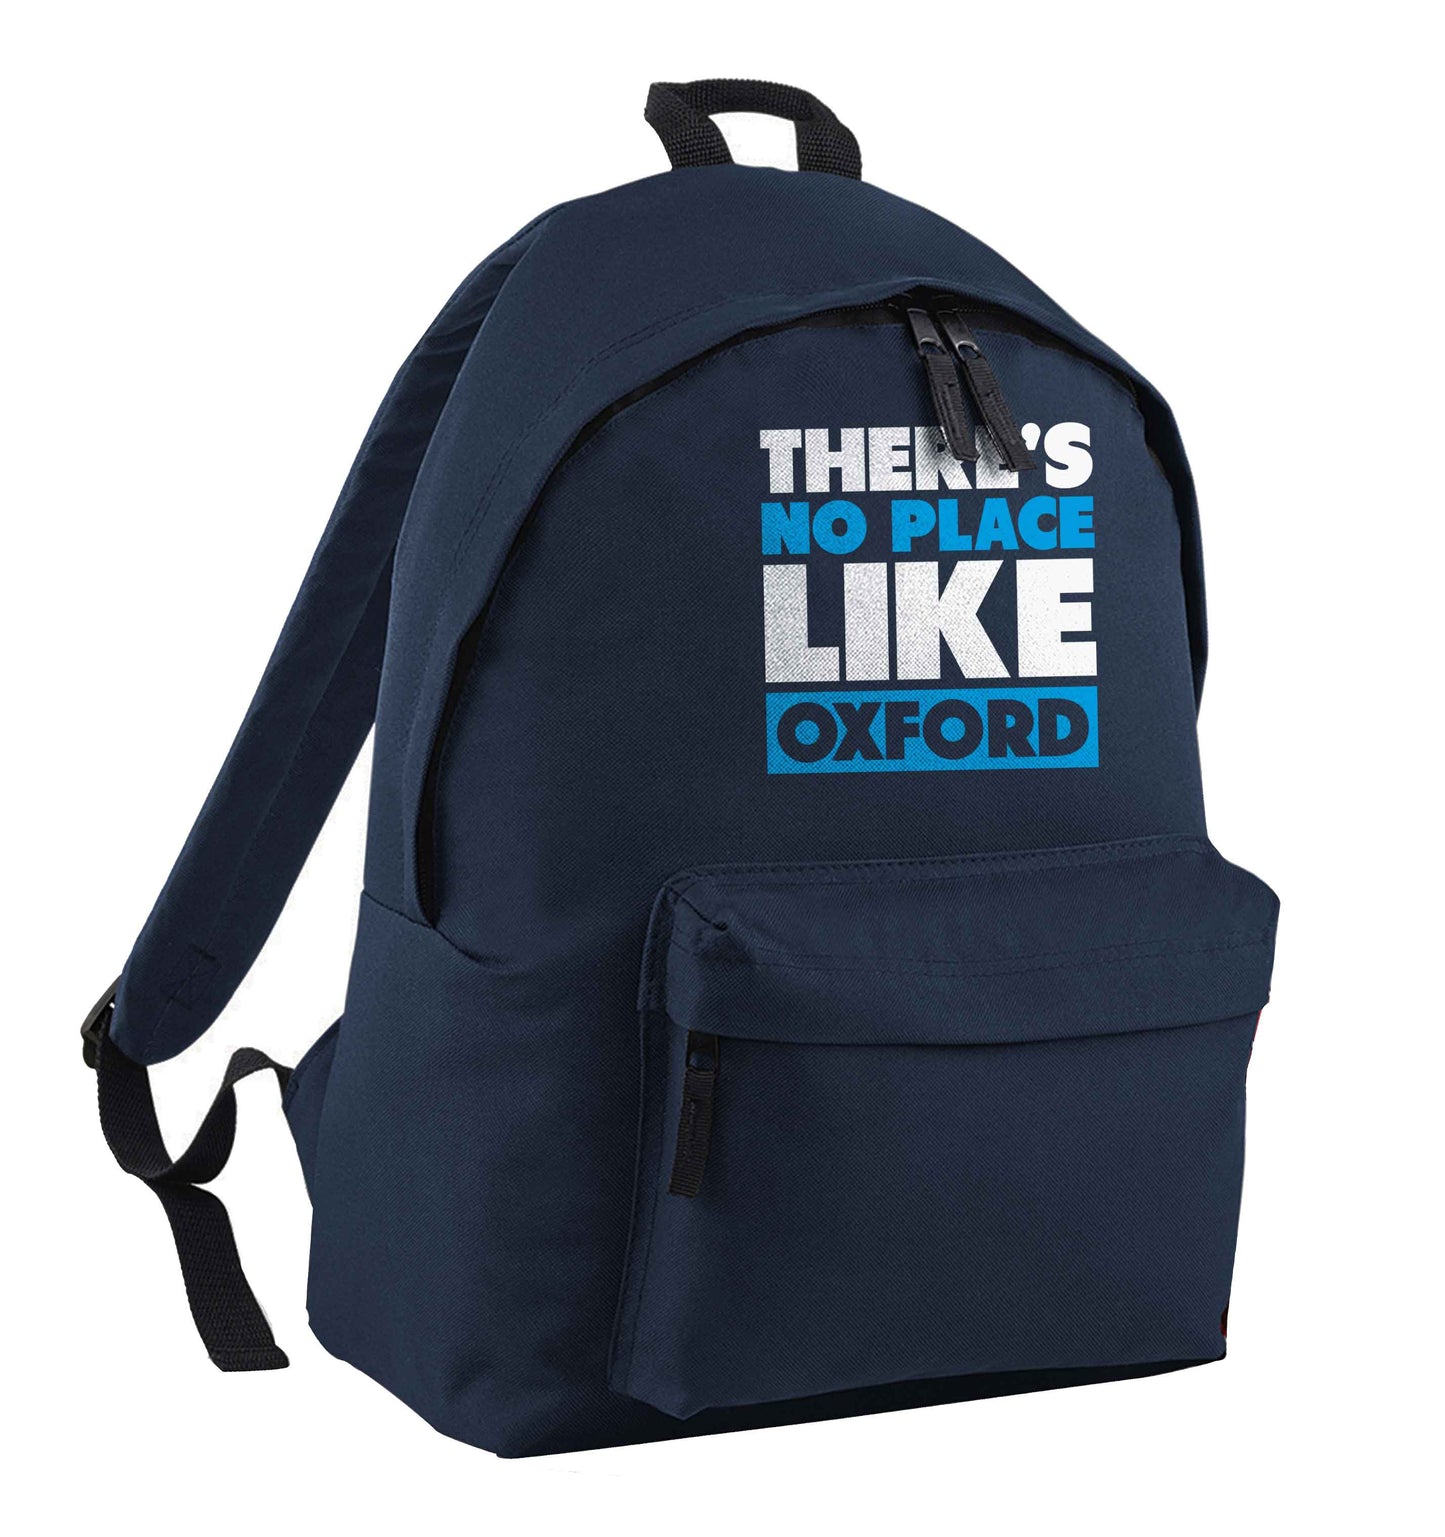 There's no place like Oxford navy children's backpack